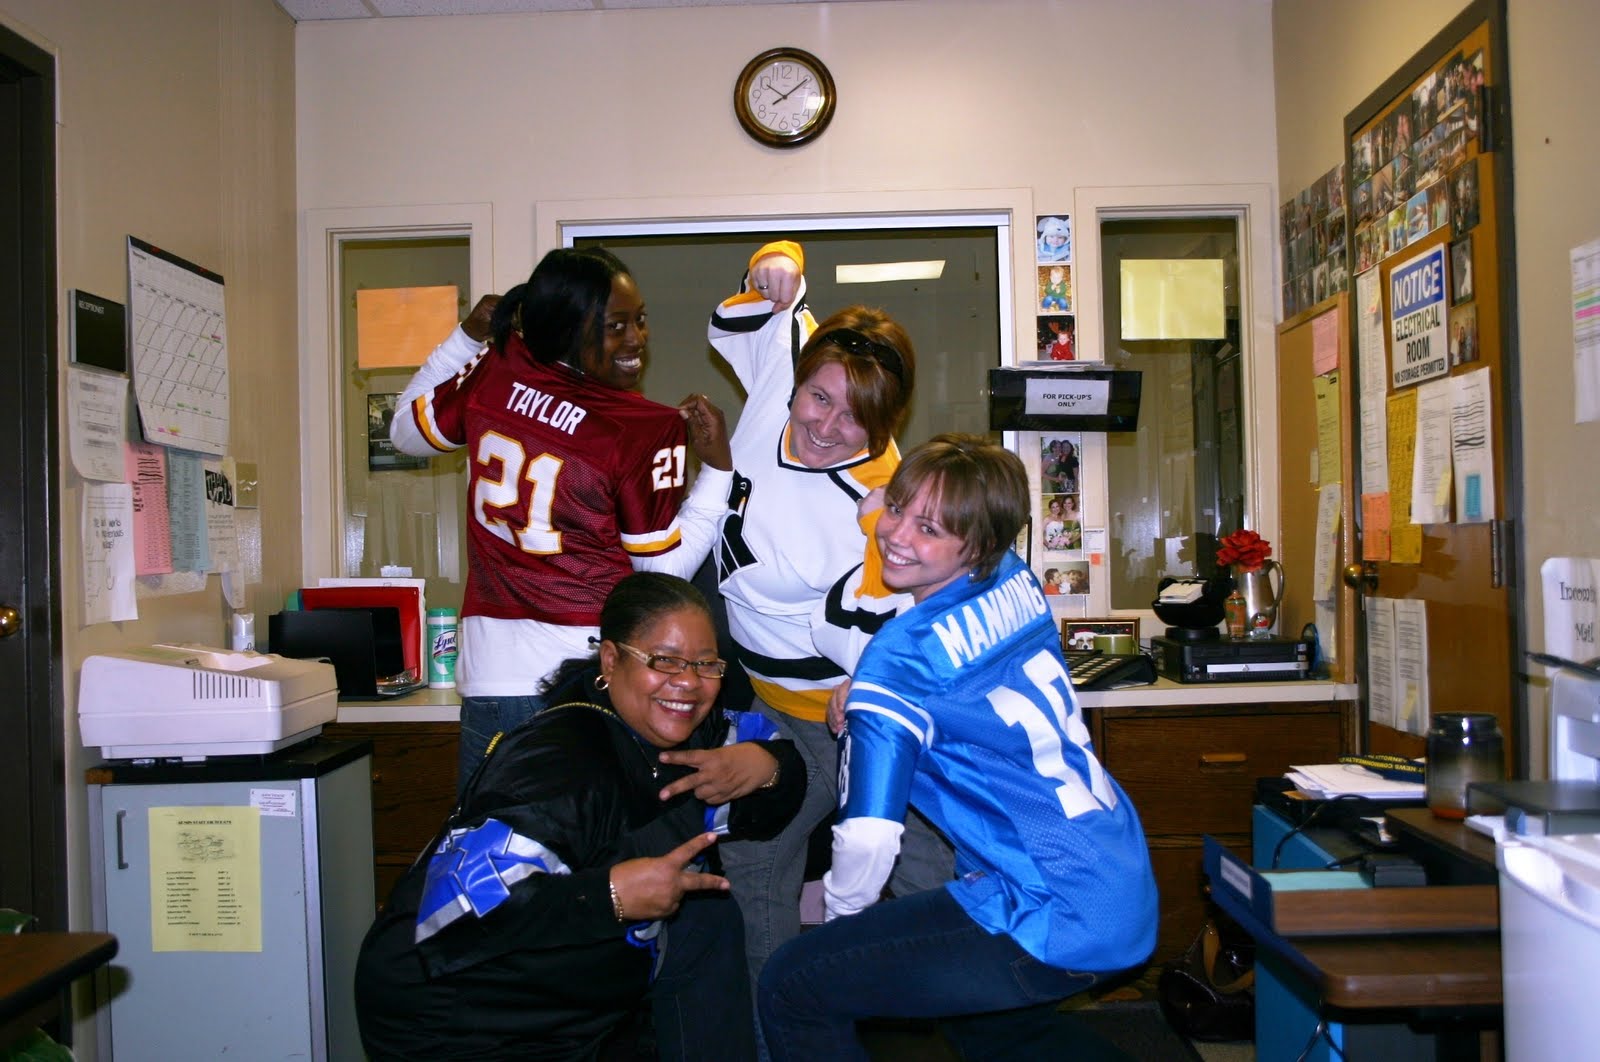 jersey day at work